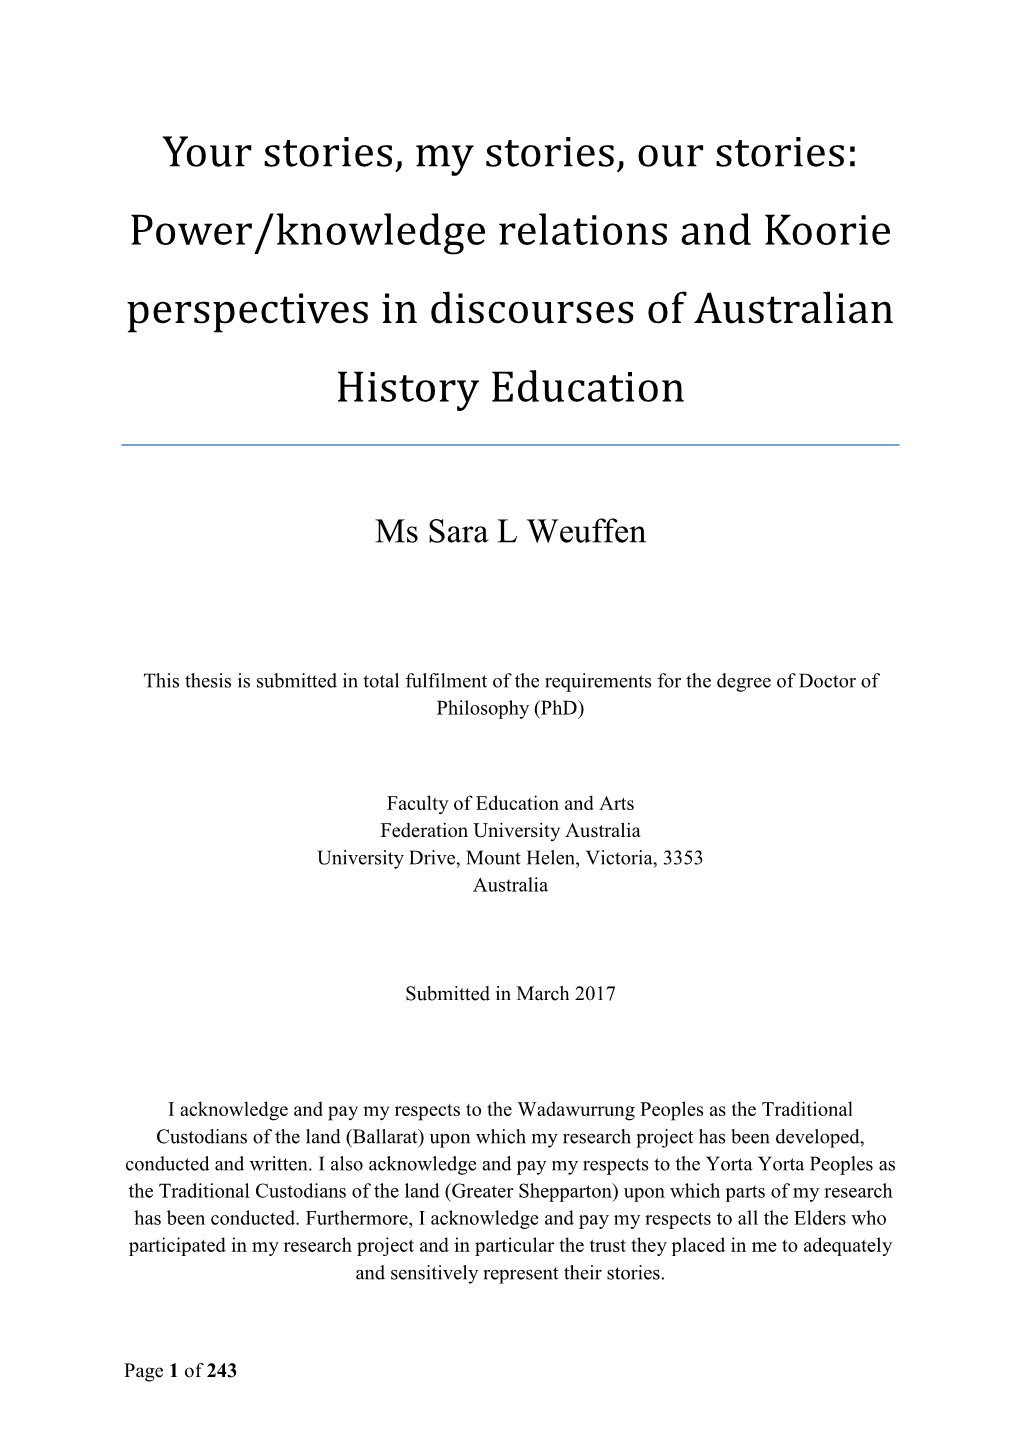 Power/Knowledge Relations and Koorie Perspectives in Discourses of Australian History Education